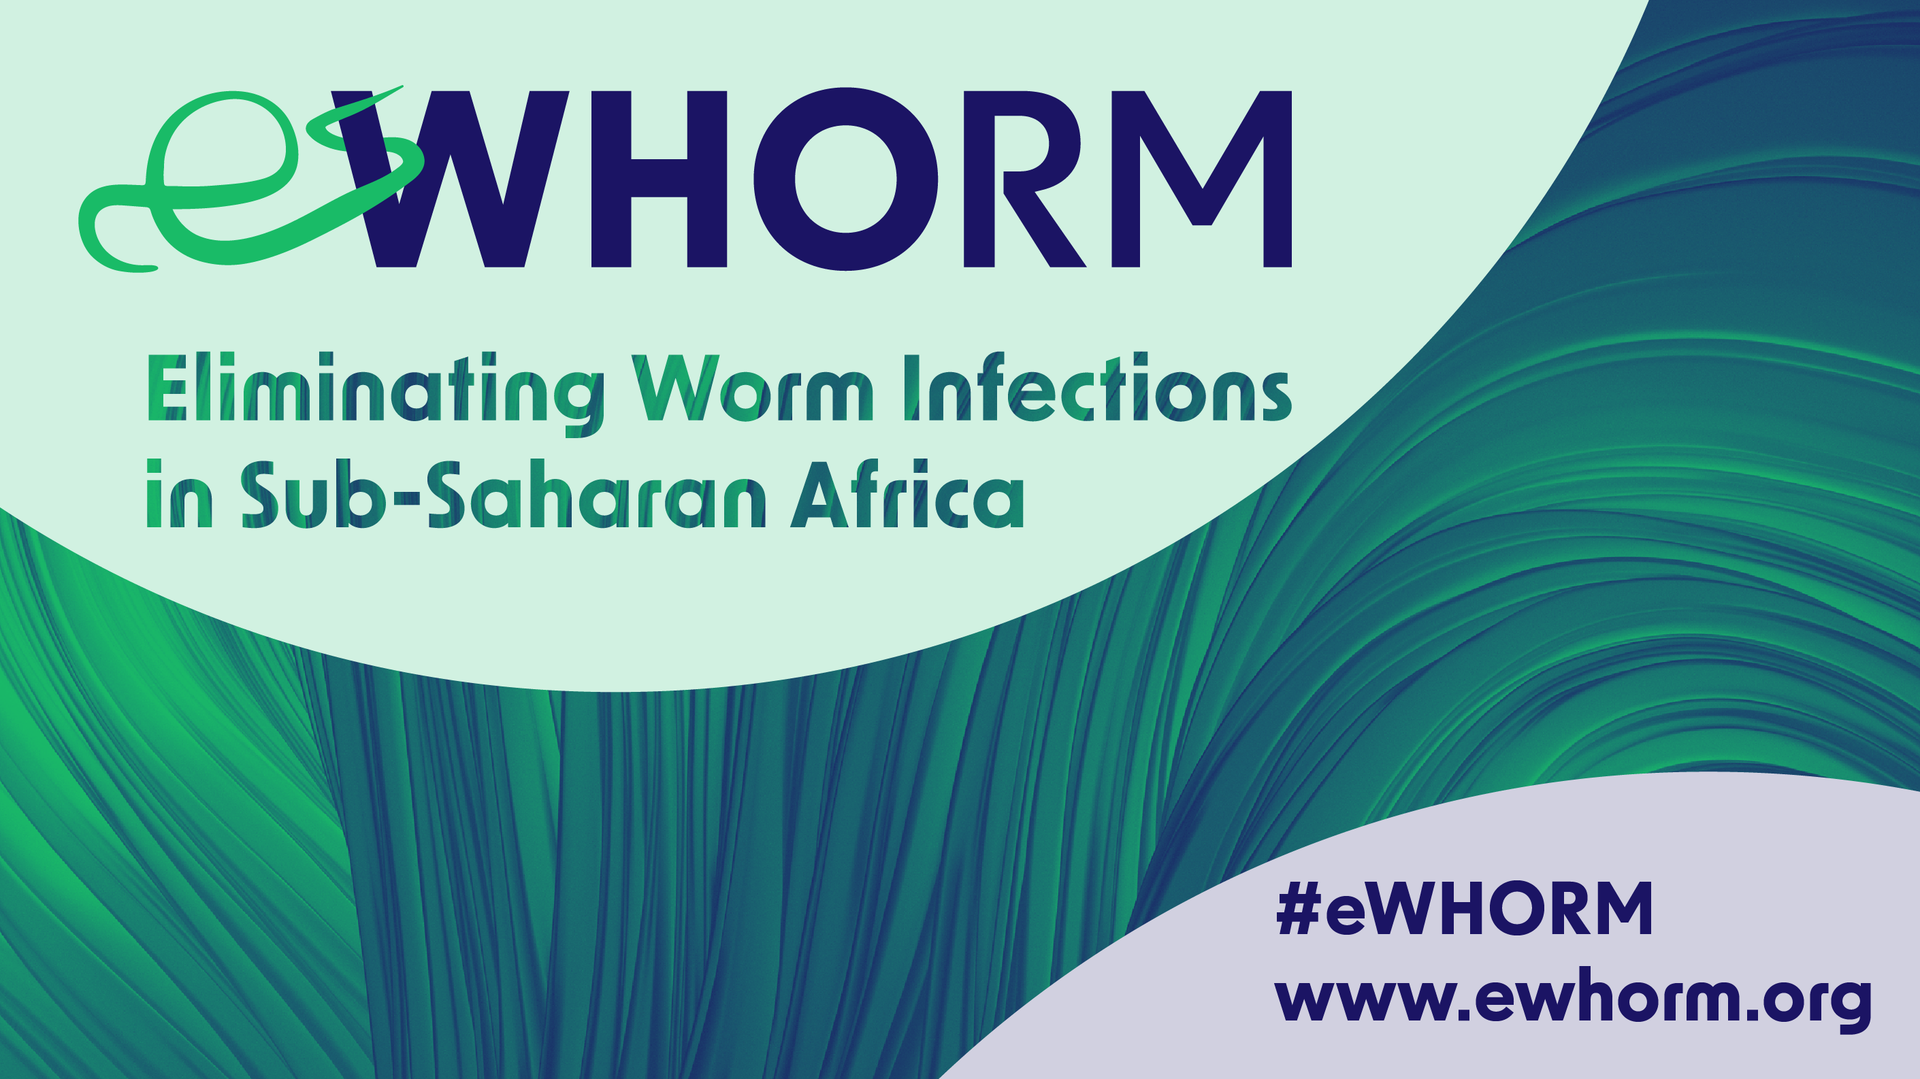 The eWHORM project to eliminate worm infections in sub-Saharan Africa is coordinated in Bonn.